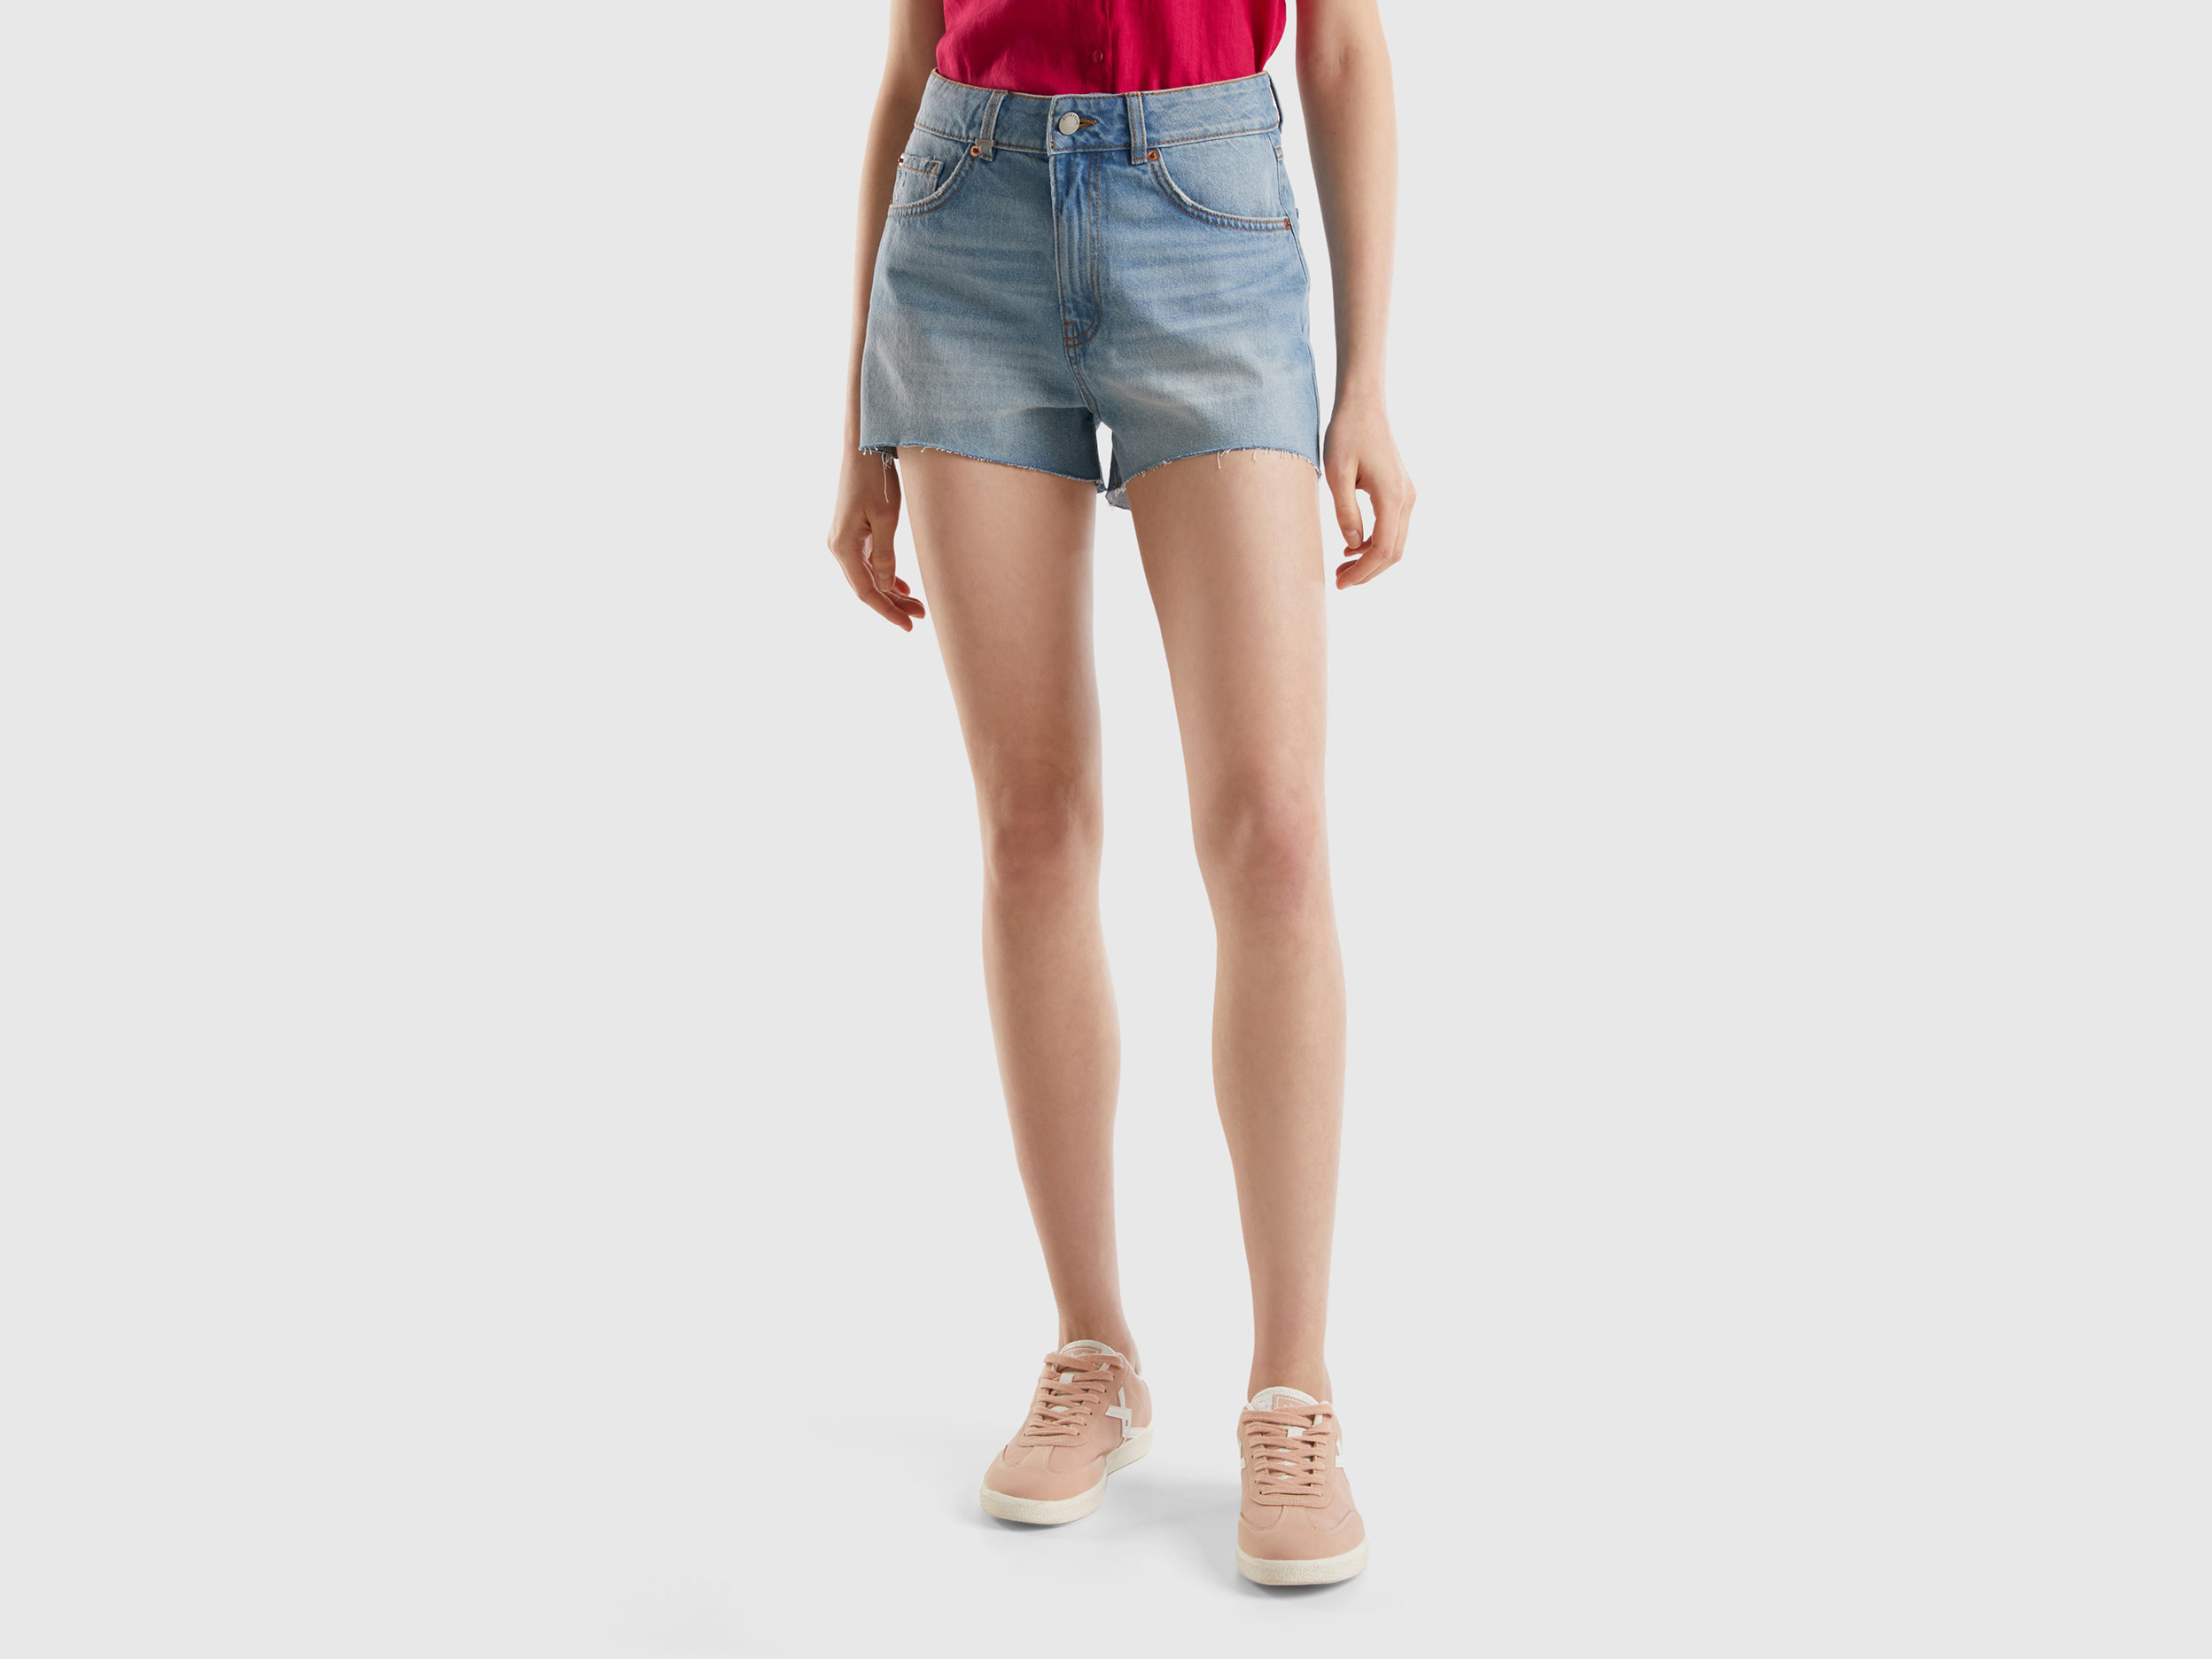 Image of Benetton, Frayed Shorts In Recycled Cotton Blend, size 25, Light Blue, Women